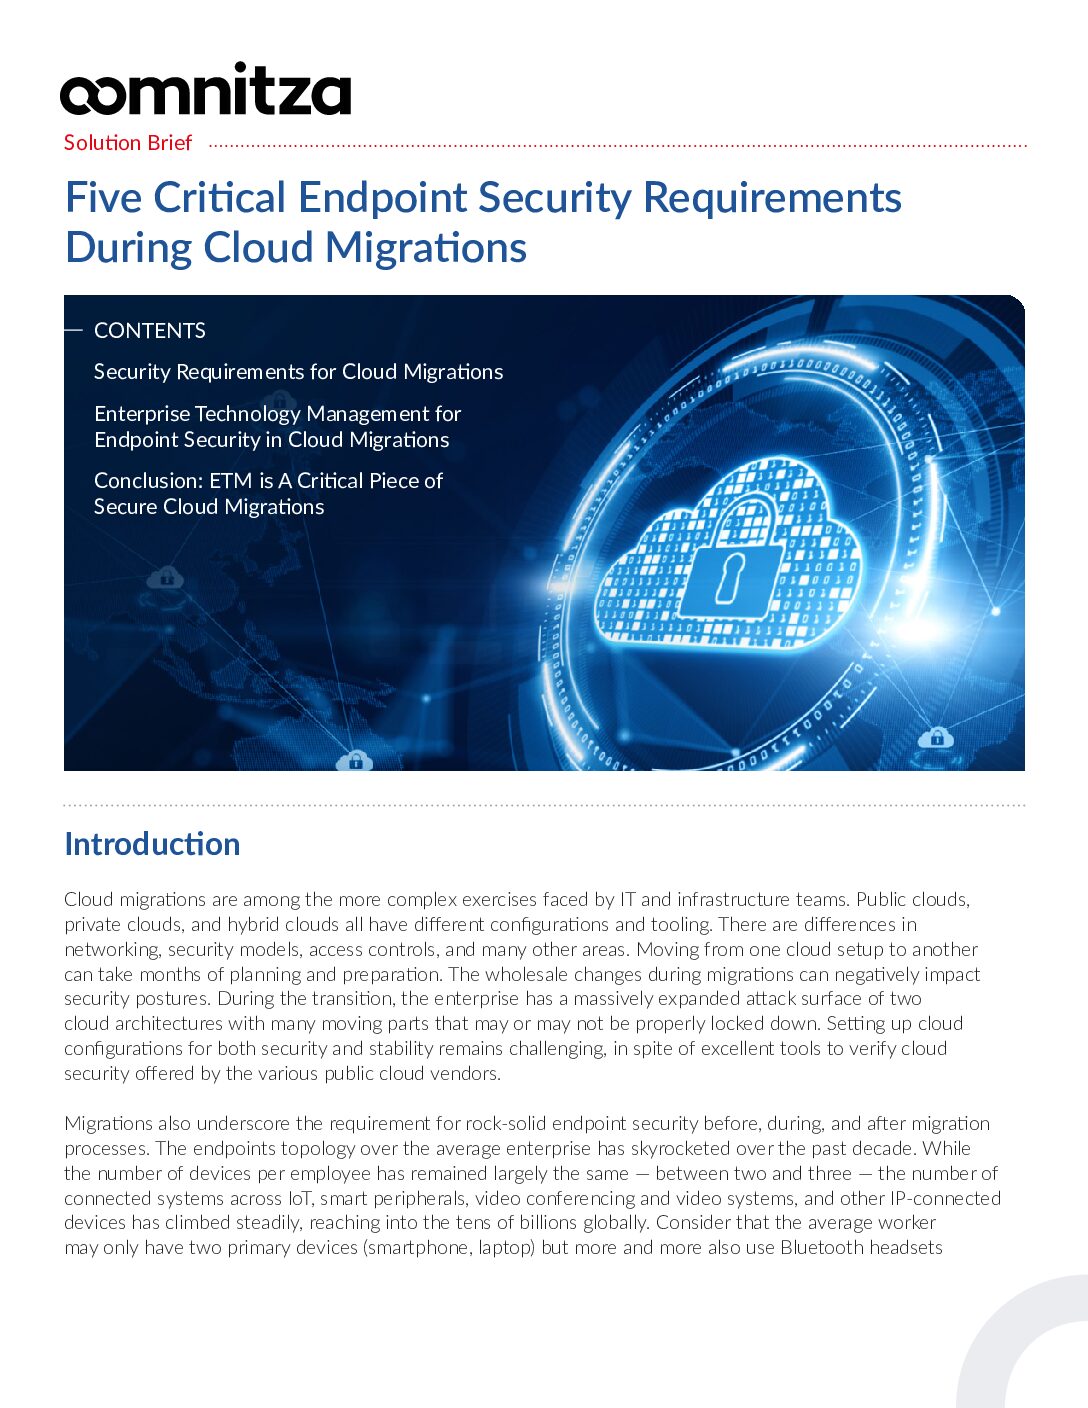 Featured image for Five Critical Endpoint Security Requirements During Cloud Migrations